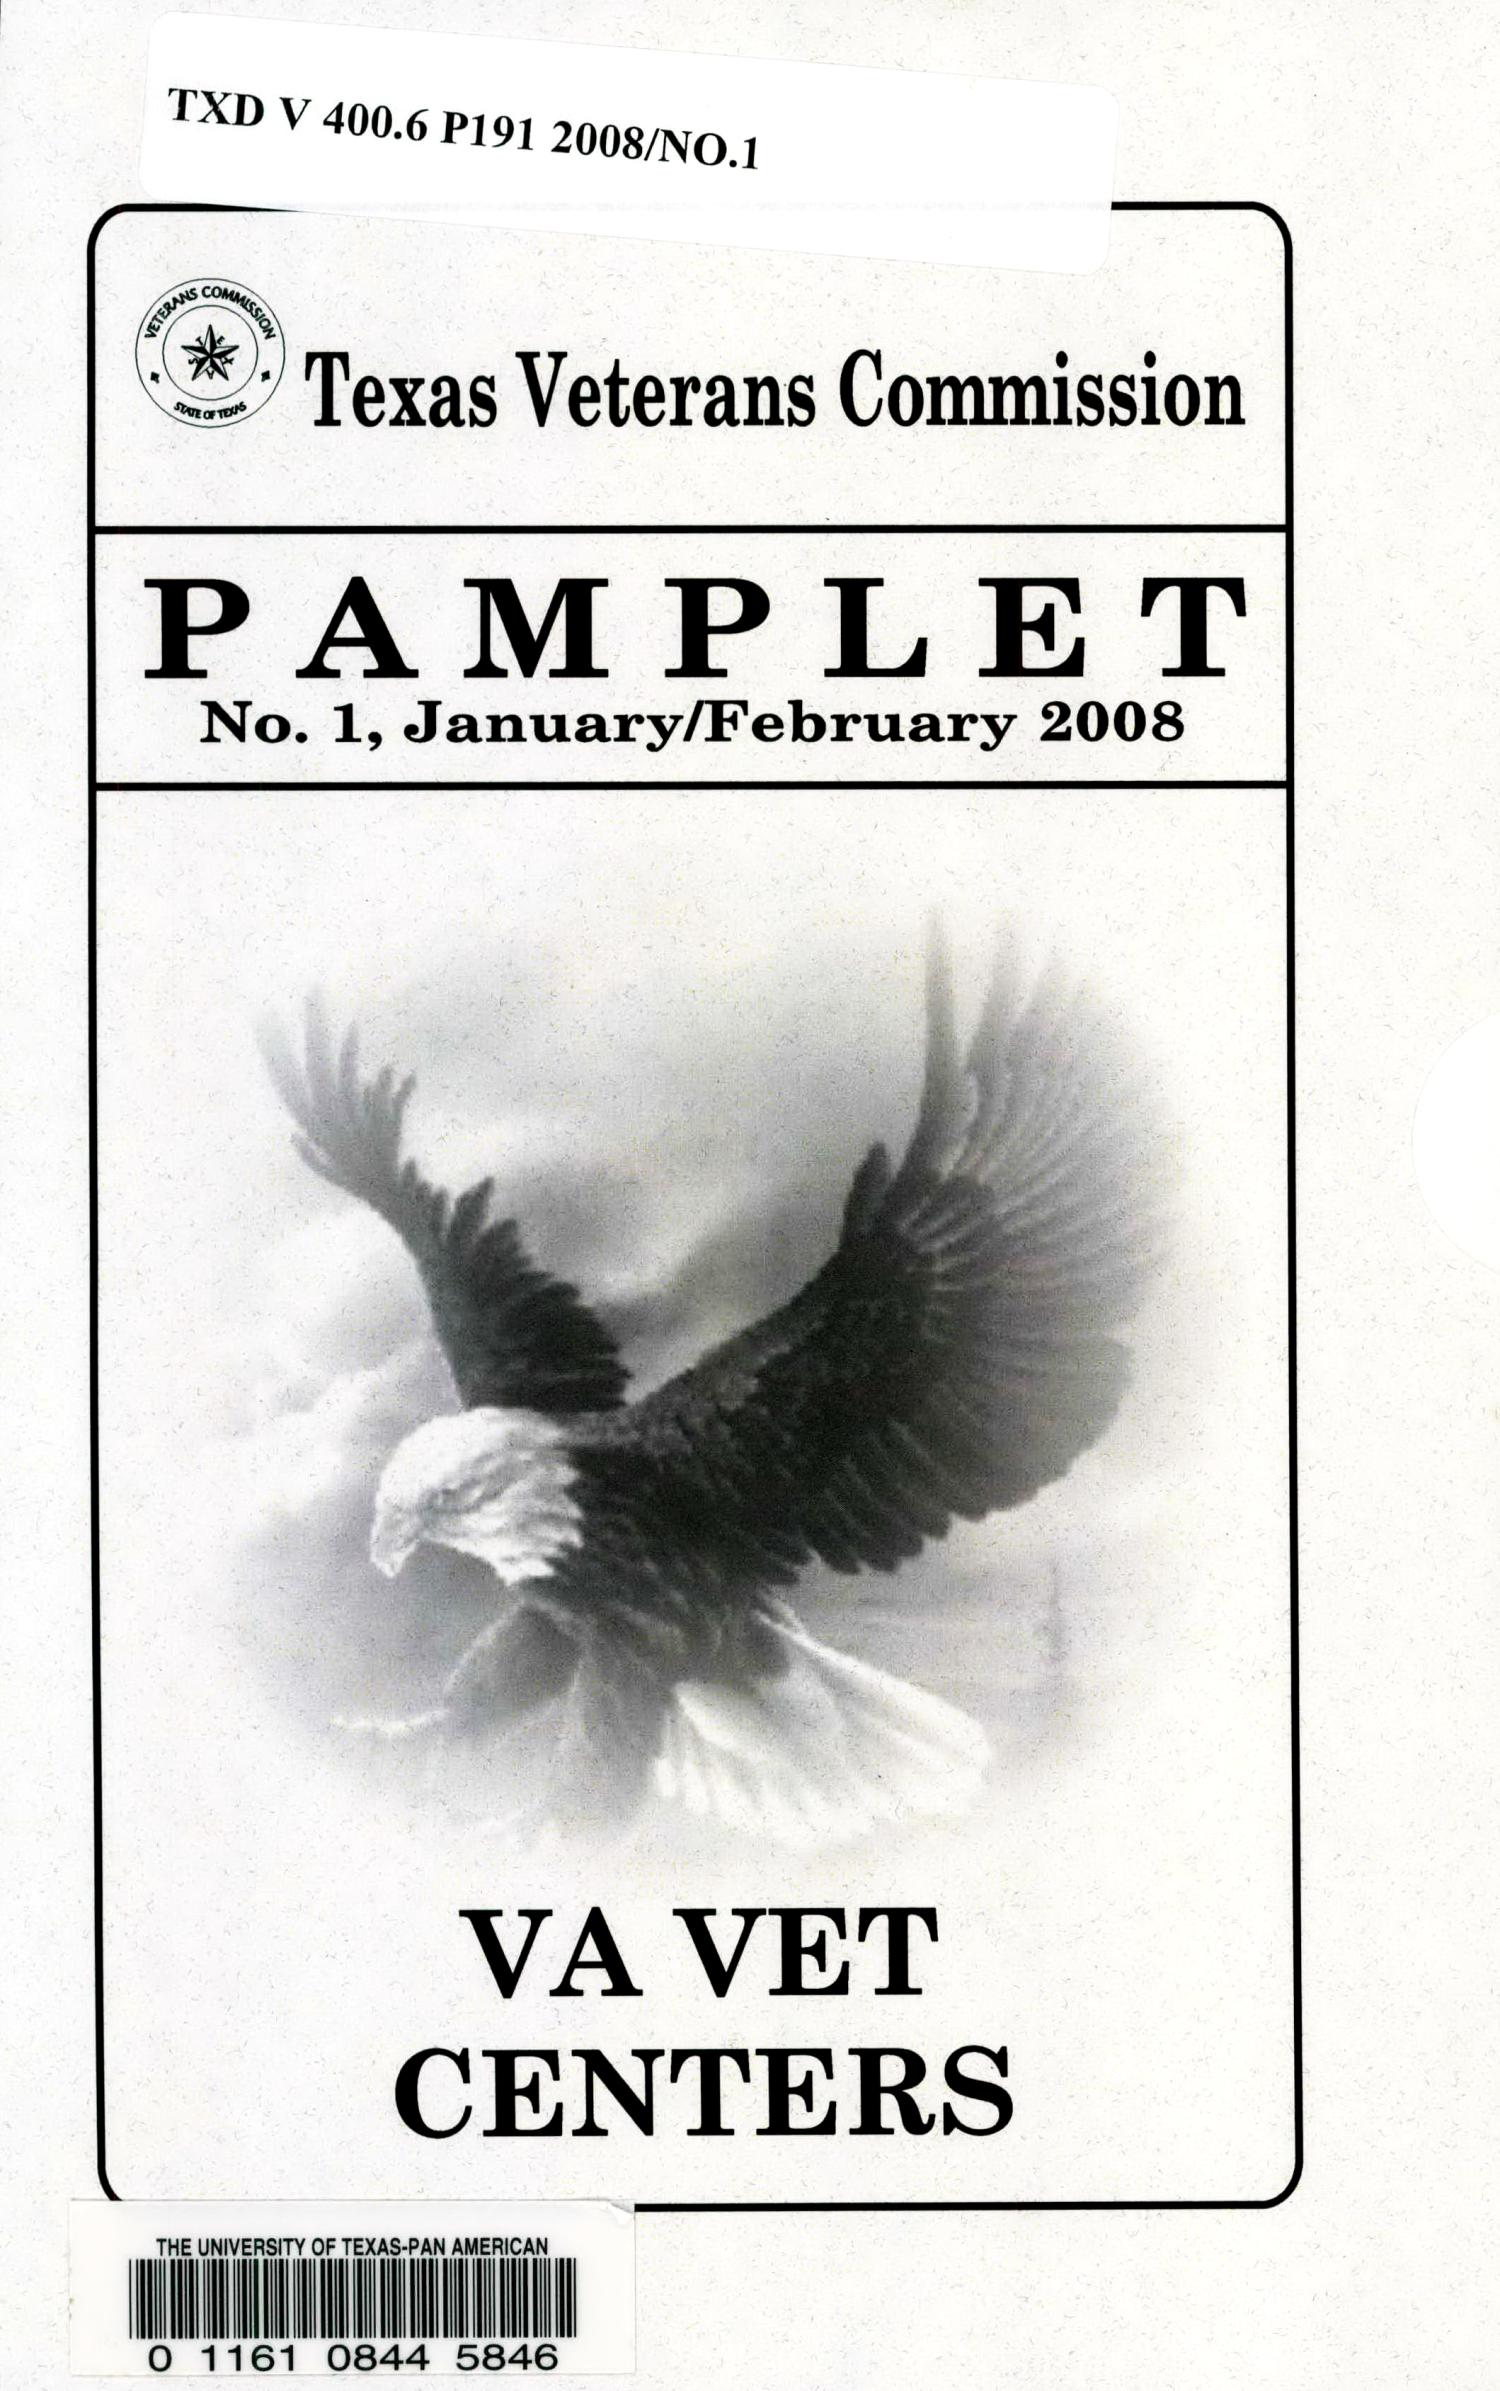 Texas Veterans Commission Pamphlet, Number 1, January/February 2008
                                                
                                                    Front Cover
                                                